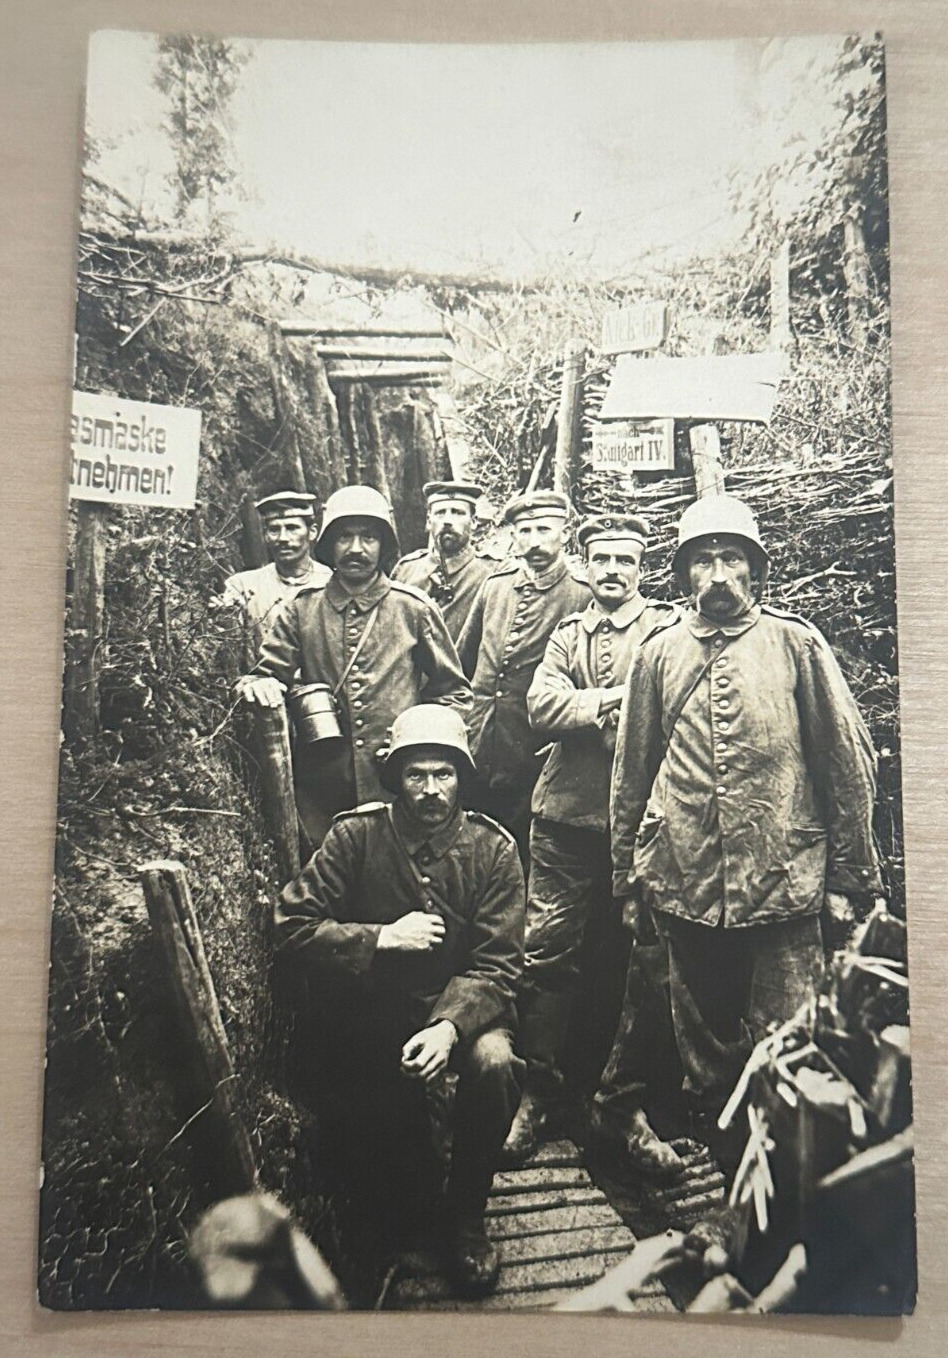 Vintage Postcard featuring Soldiers in Trenches - Possibly World War 1 WWI